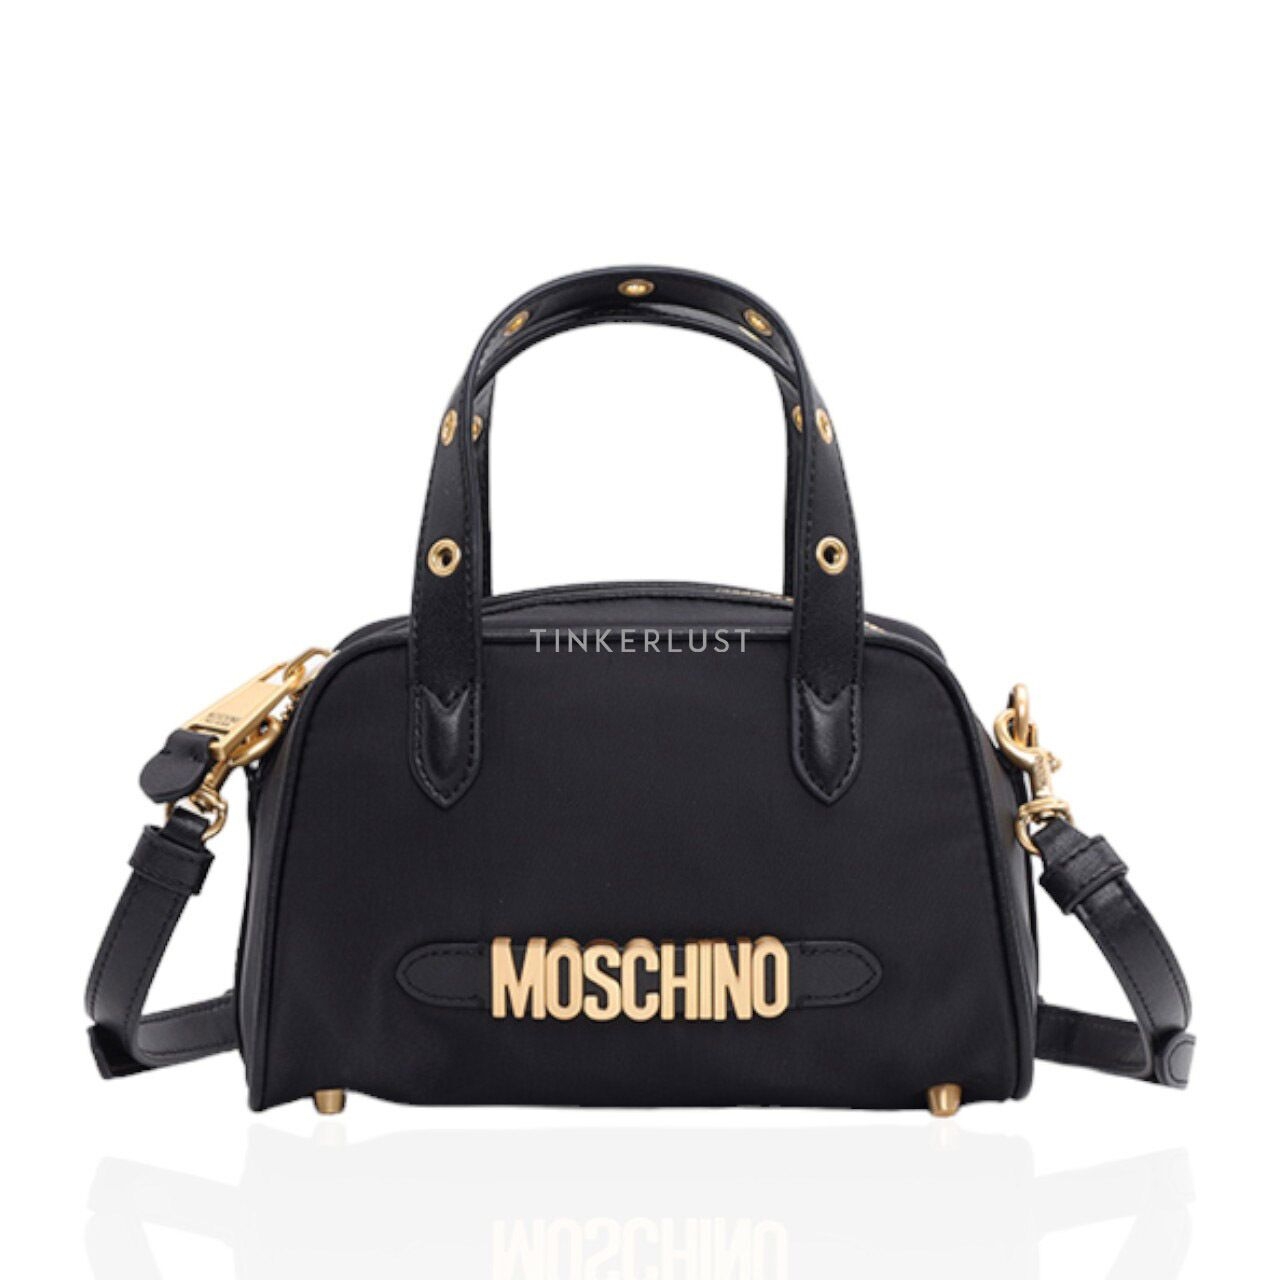 Moschino Logo Top Handle in Black GHW with Metal Detail Satchel